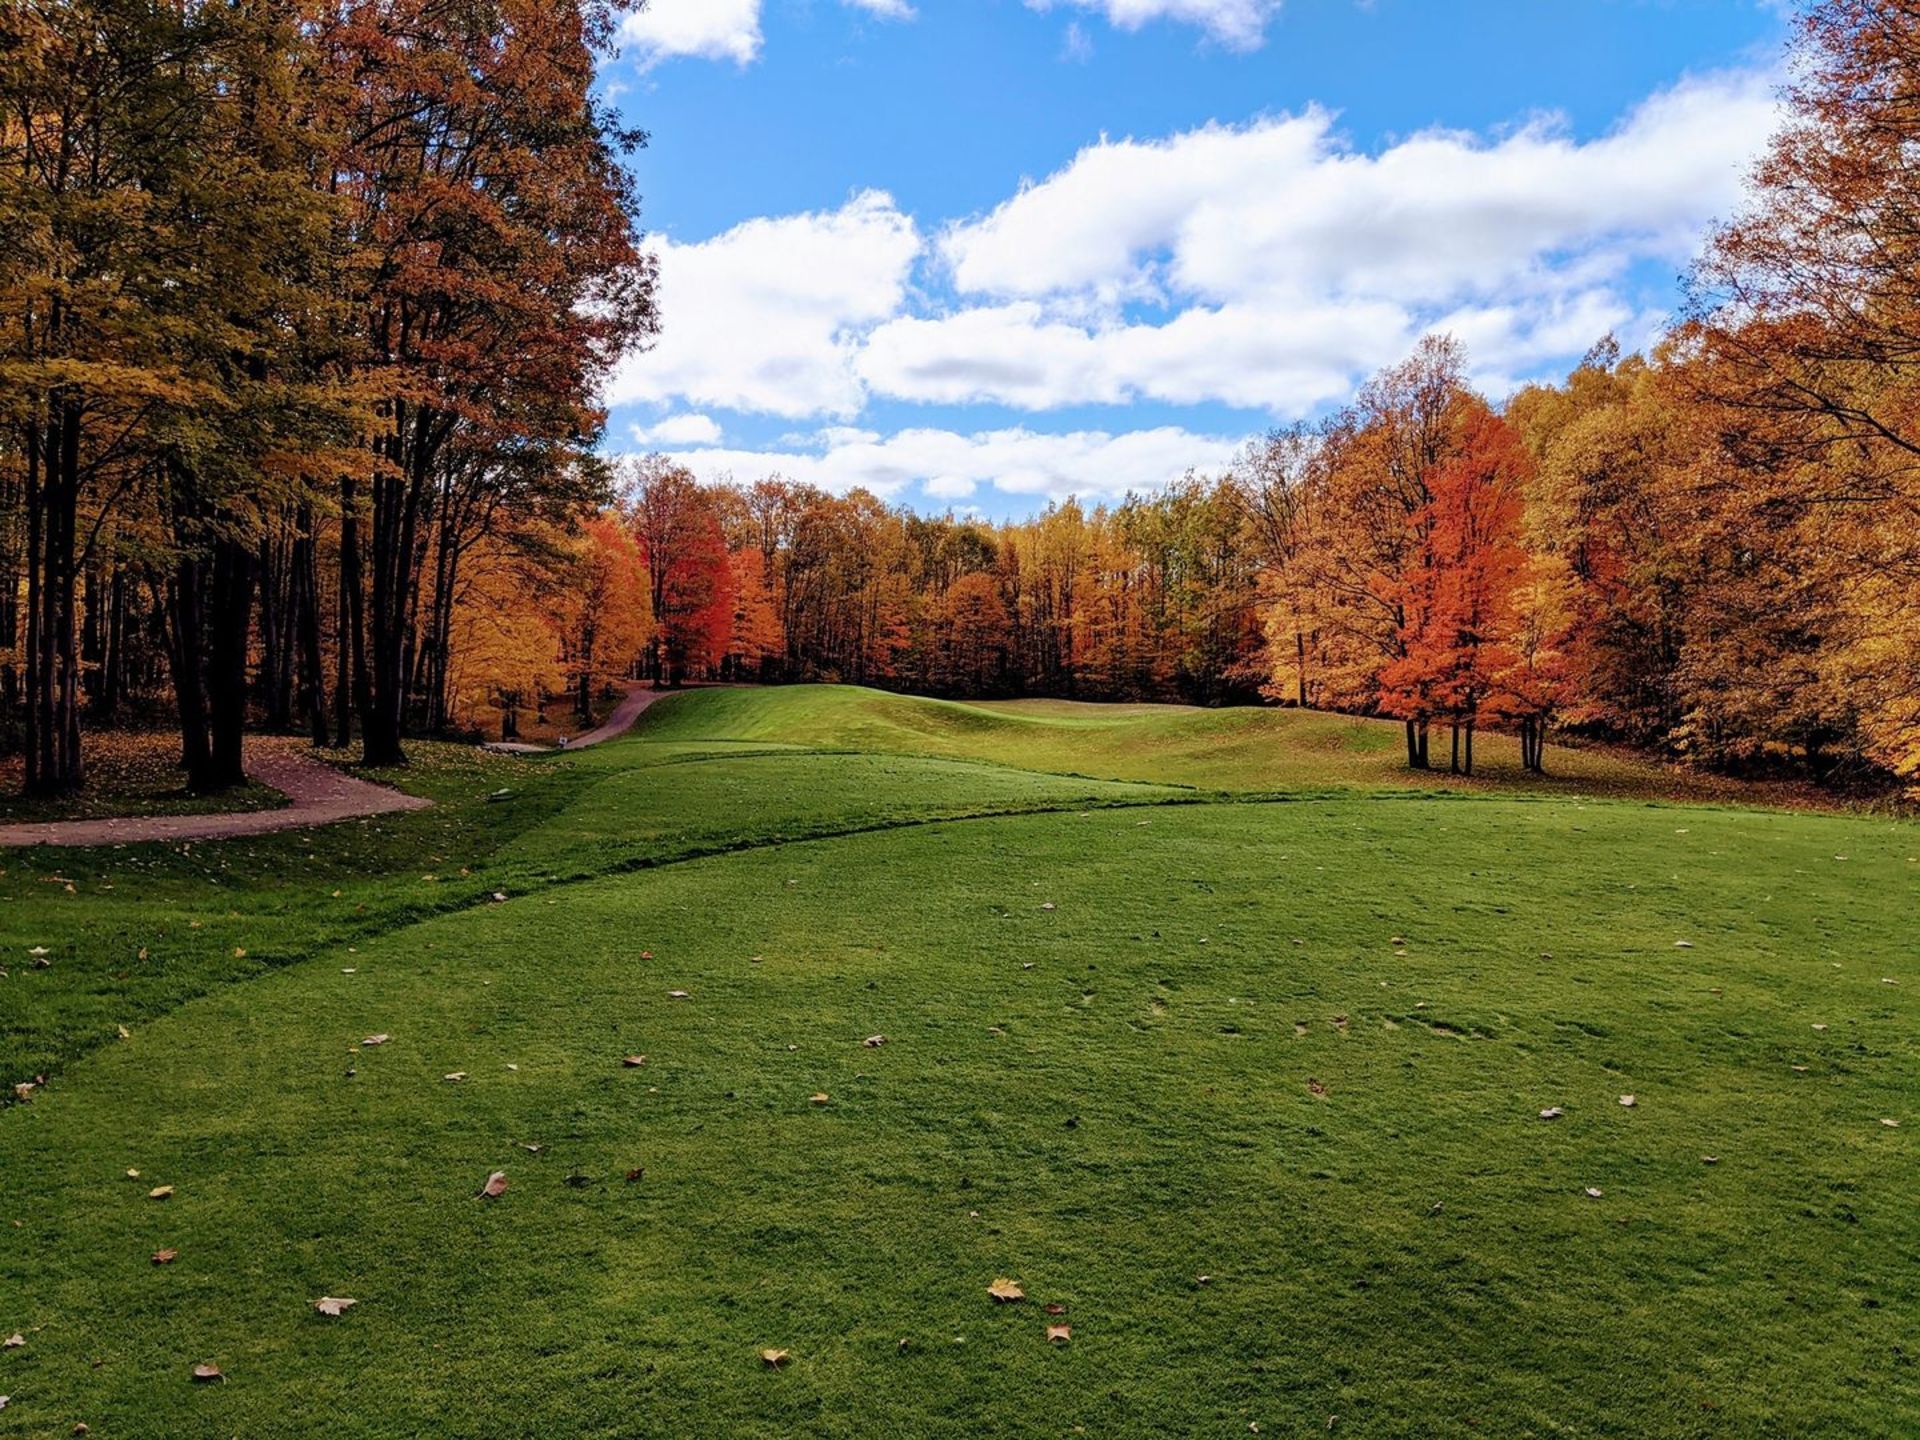 Build Your Dream Home on a Lot at Garland Woods Golf Resort in Oscoda County, Michigan! - Image 17 of 17